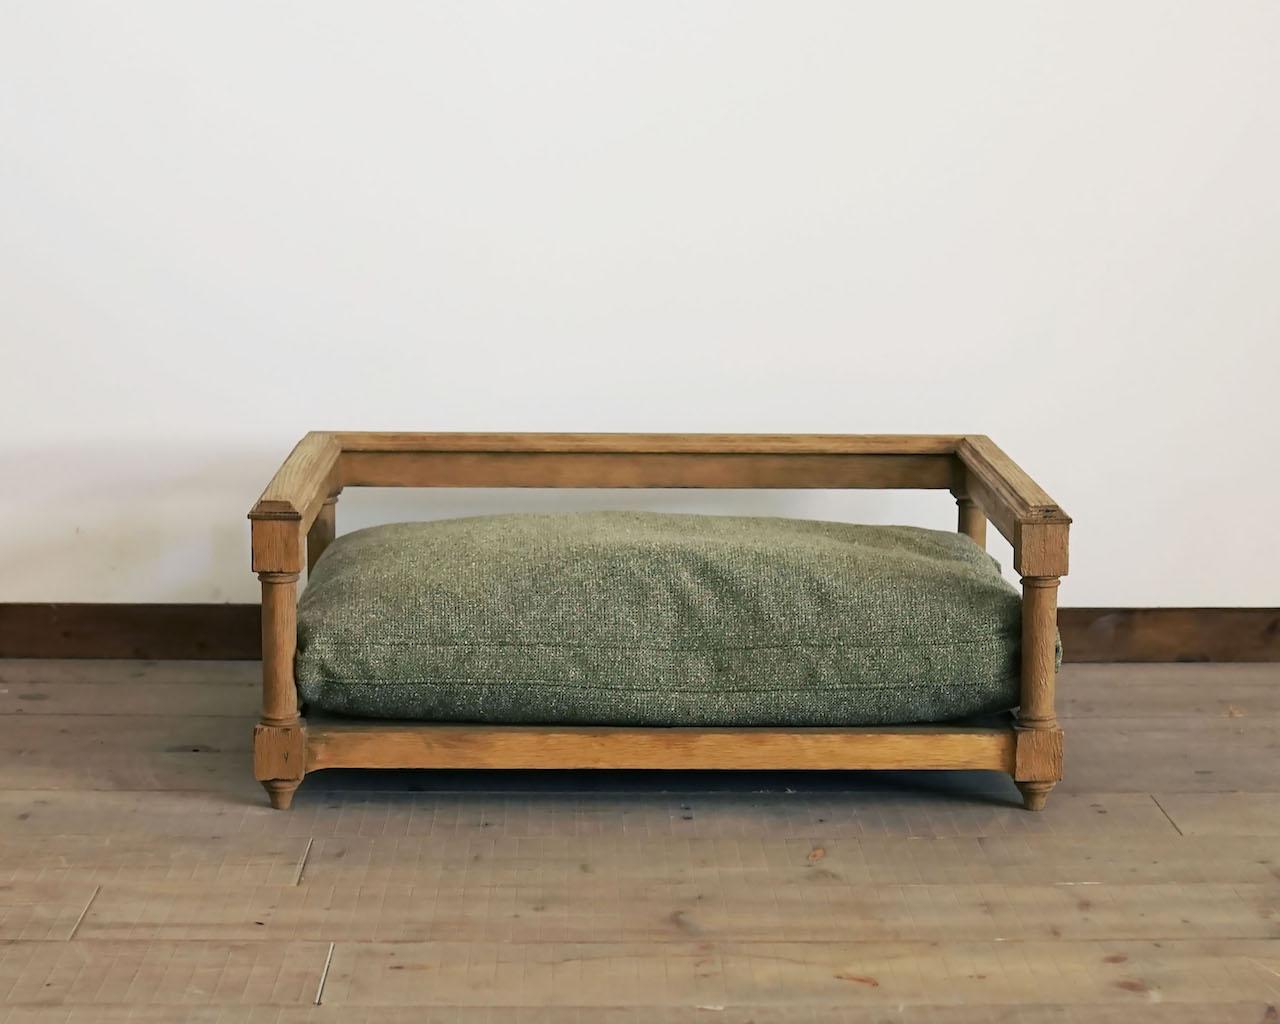 The bed is made of natural wood, with a soothing antique seat and a textured frame. Your pet is an important member of the family, and you want him or her to be able to relax in a bed that is both functional and attractive.
Your dog or cat needs a